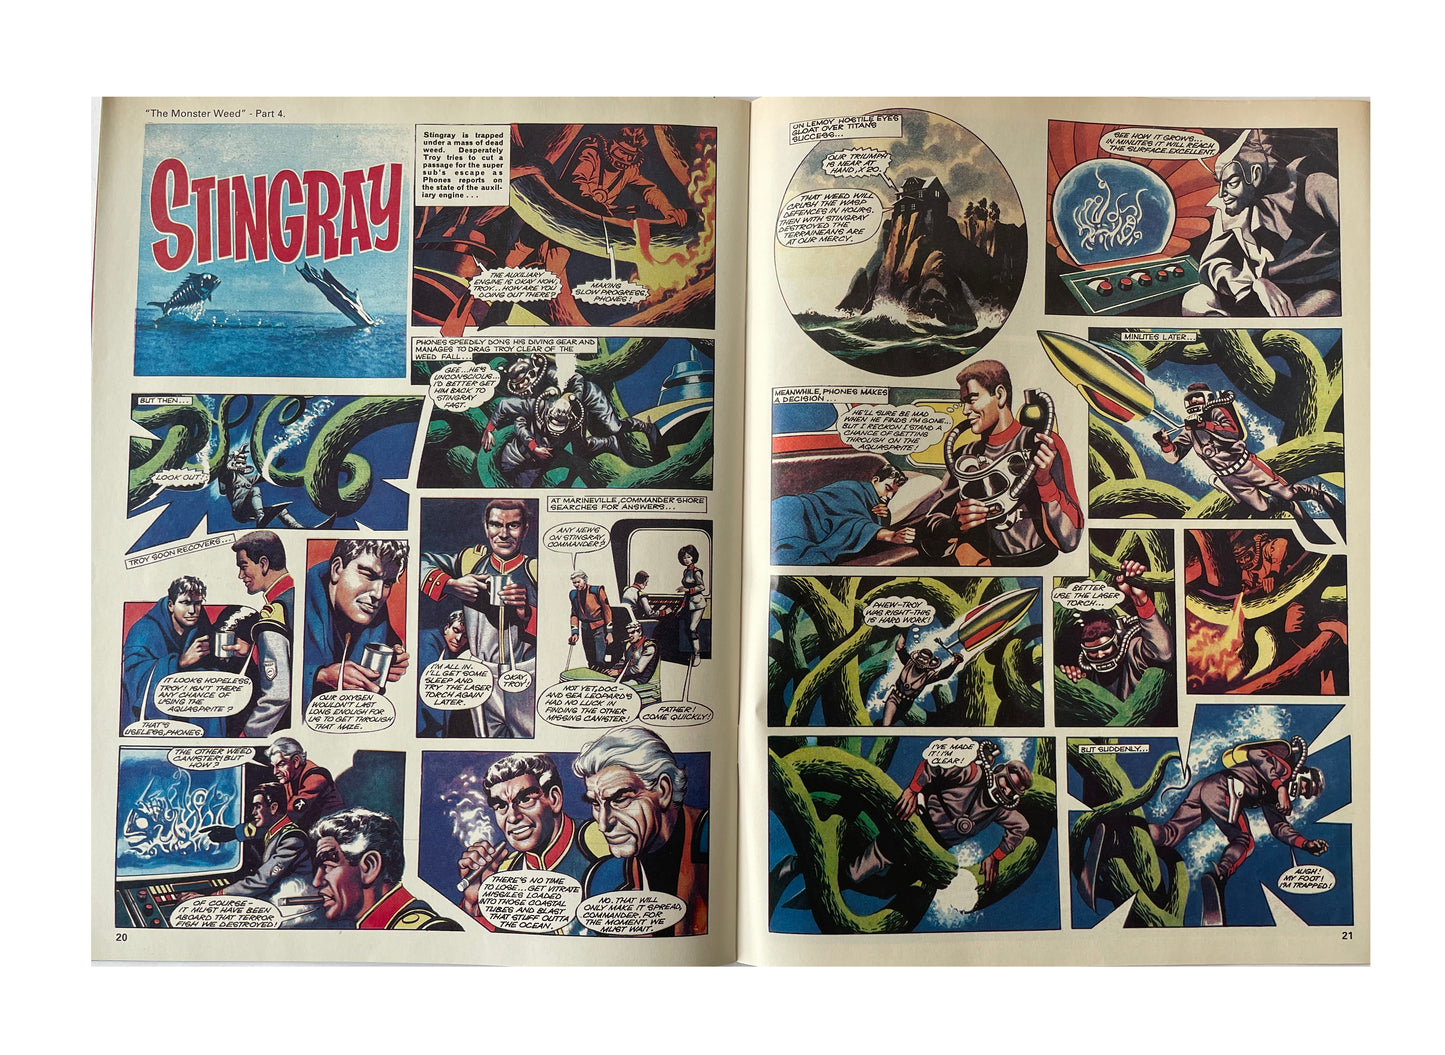 Vintage 1993 Gerry Andersons Stand By For Action... Stingray The Comic Issue No. 14 - April 10th To April 23rd - Brand New Shop Stock Room Find